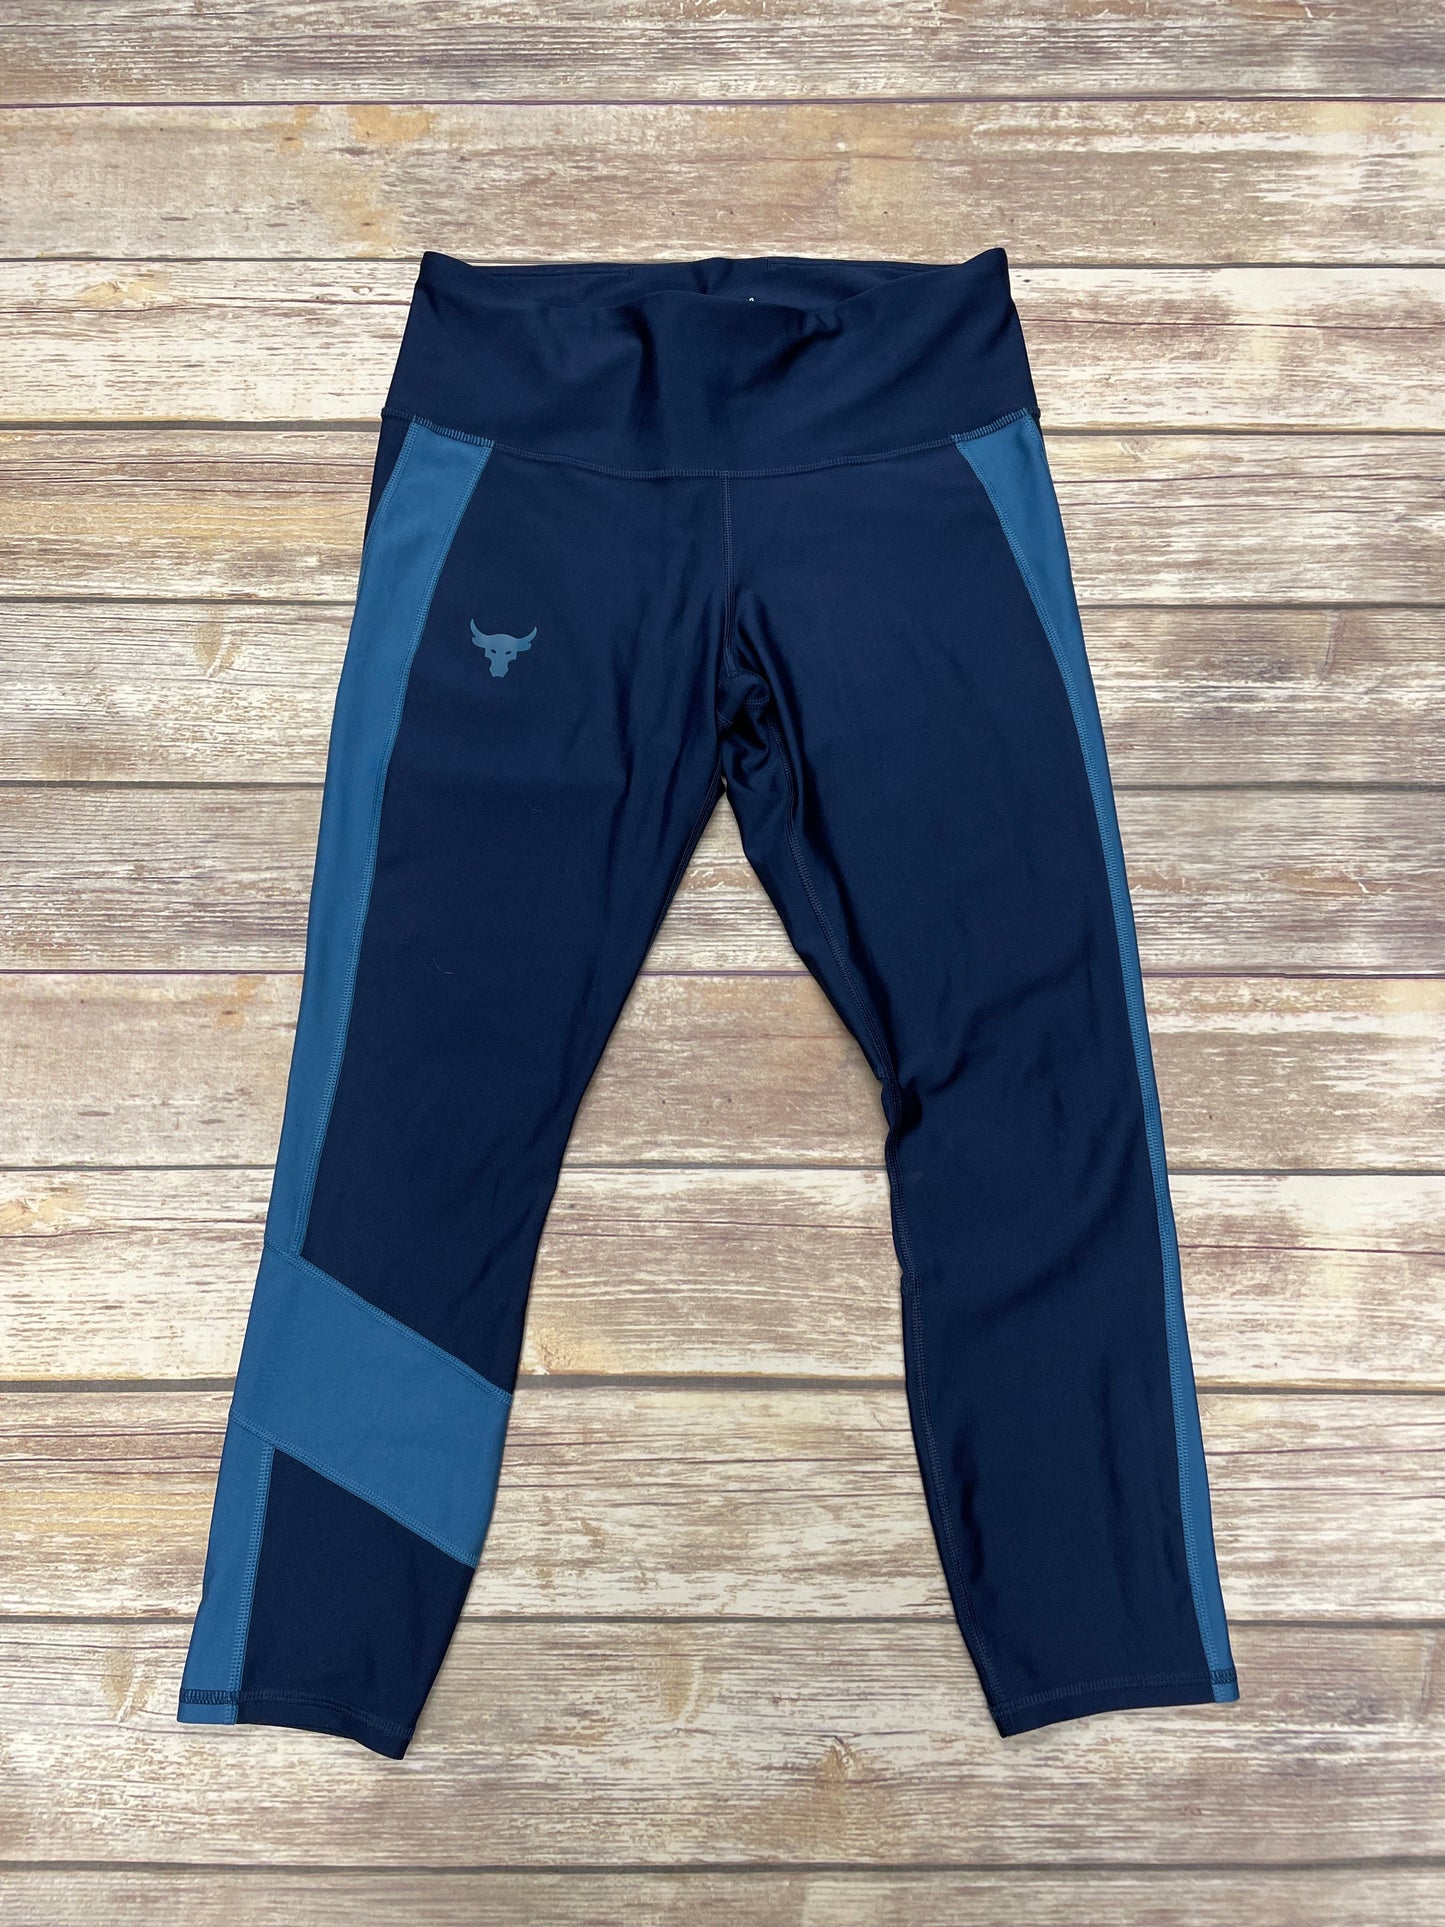 Athletic Leggings By Under Armour  Size: L